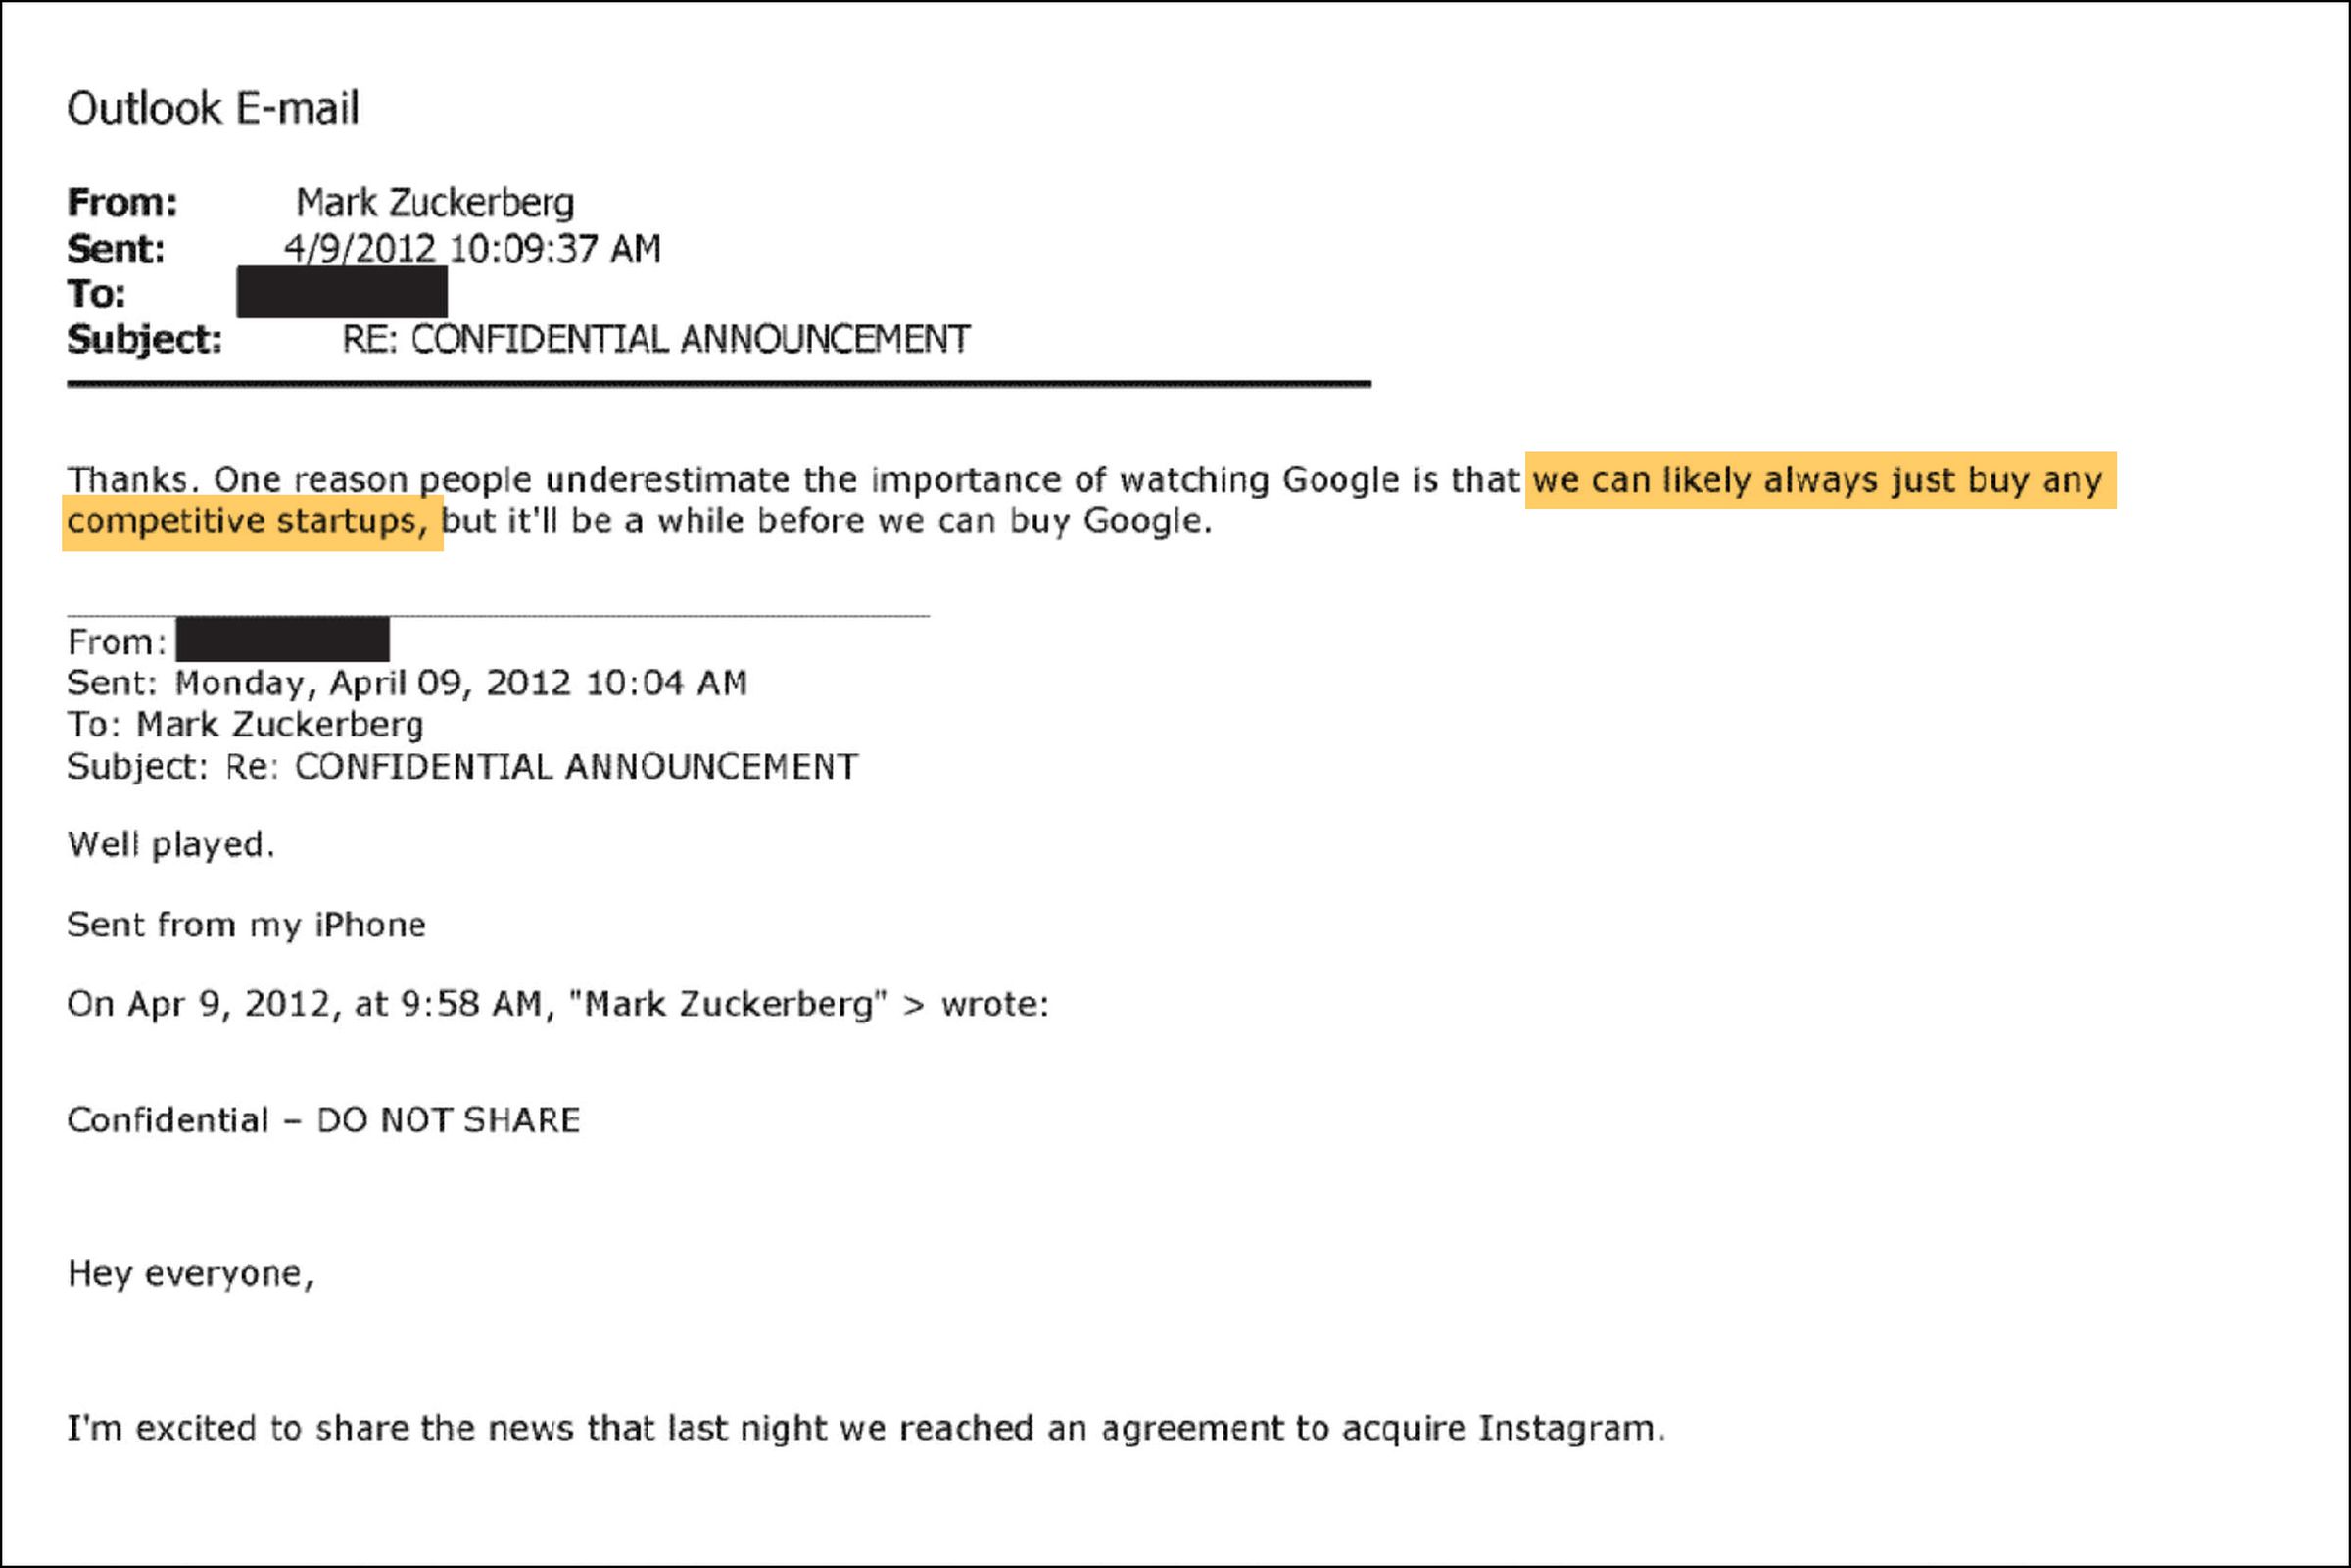 From Mark Zuckerberg to redacted, Monday April 9, 2012, 10:09am, subject RE: CONFIDENTIAL ANNOUNCEMENT. “...we can likely always just buy any competitive startups...”